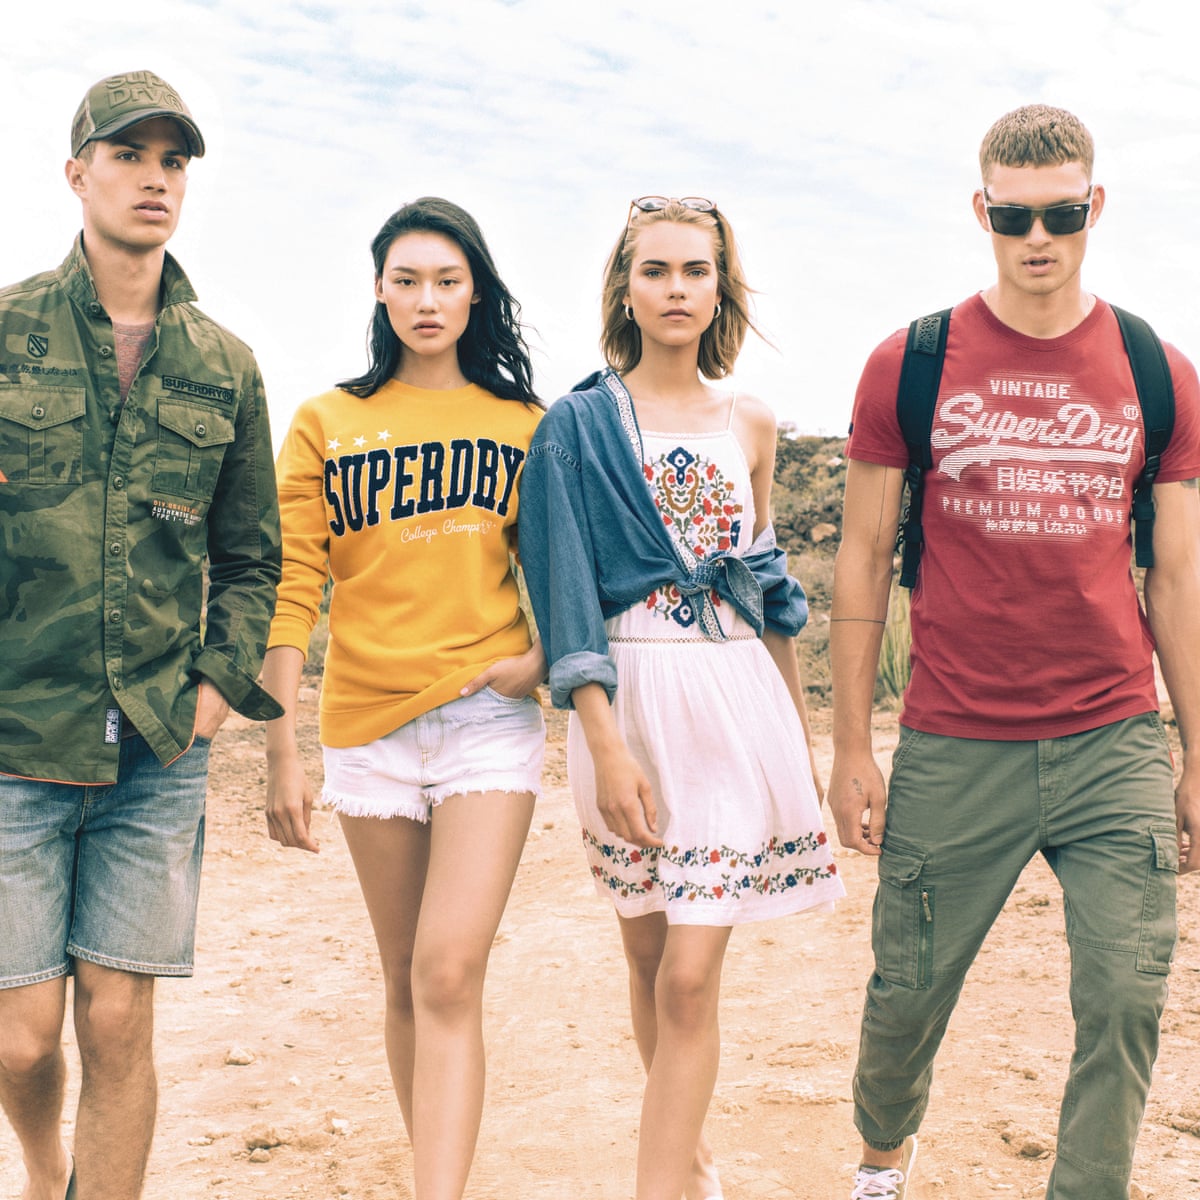 Stoutmoedig Bestuiver Tranen Struggling Superdry tries to get back into fashion | Shane Hickey | The  Guardian